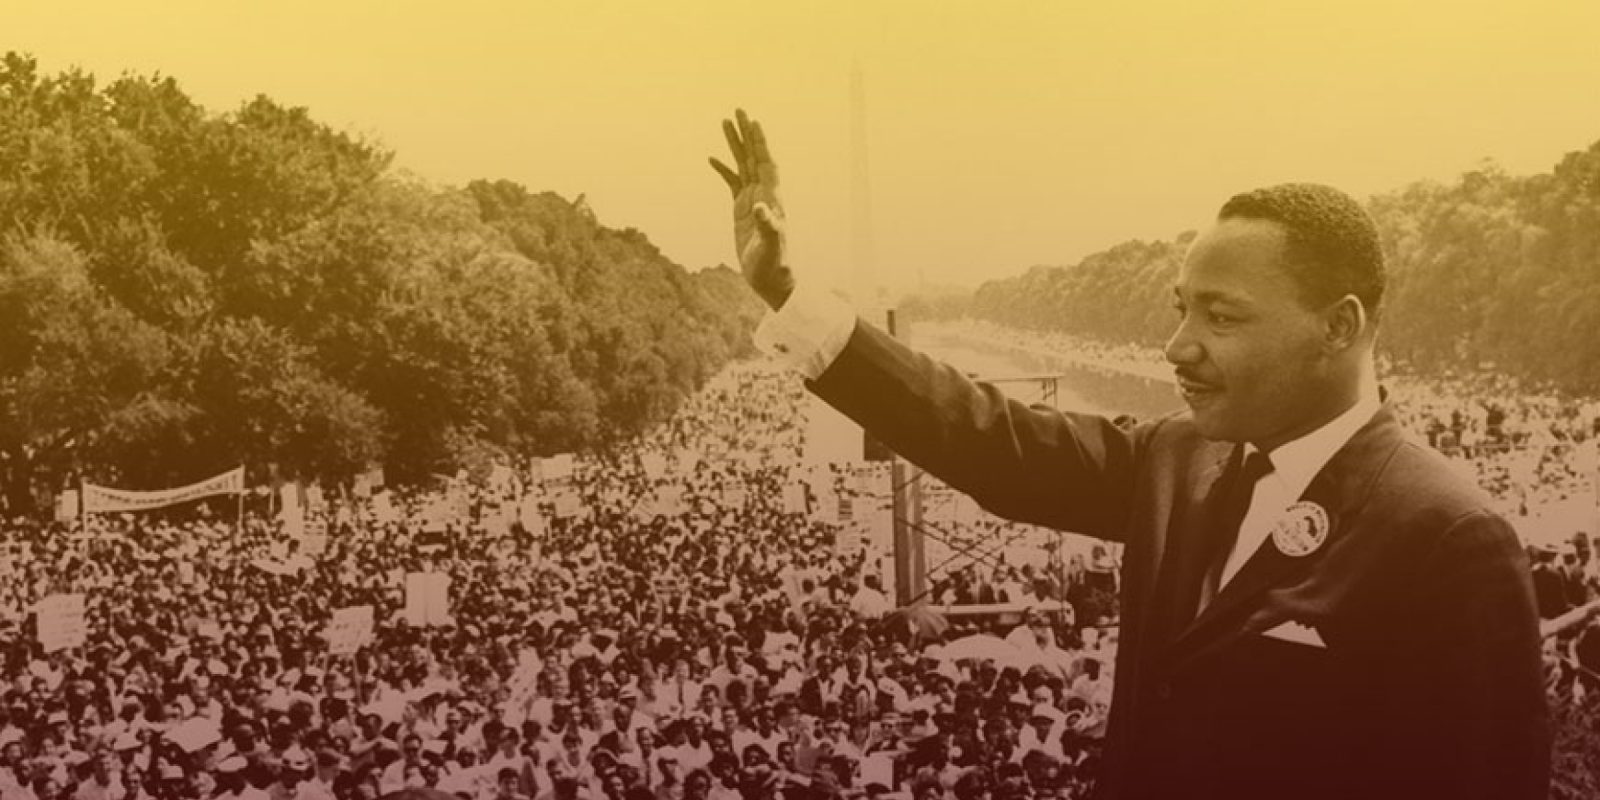 Dr. Martin Luther King, Jr. raises a hand in front of crowds of people at the Lincoln Memorial.